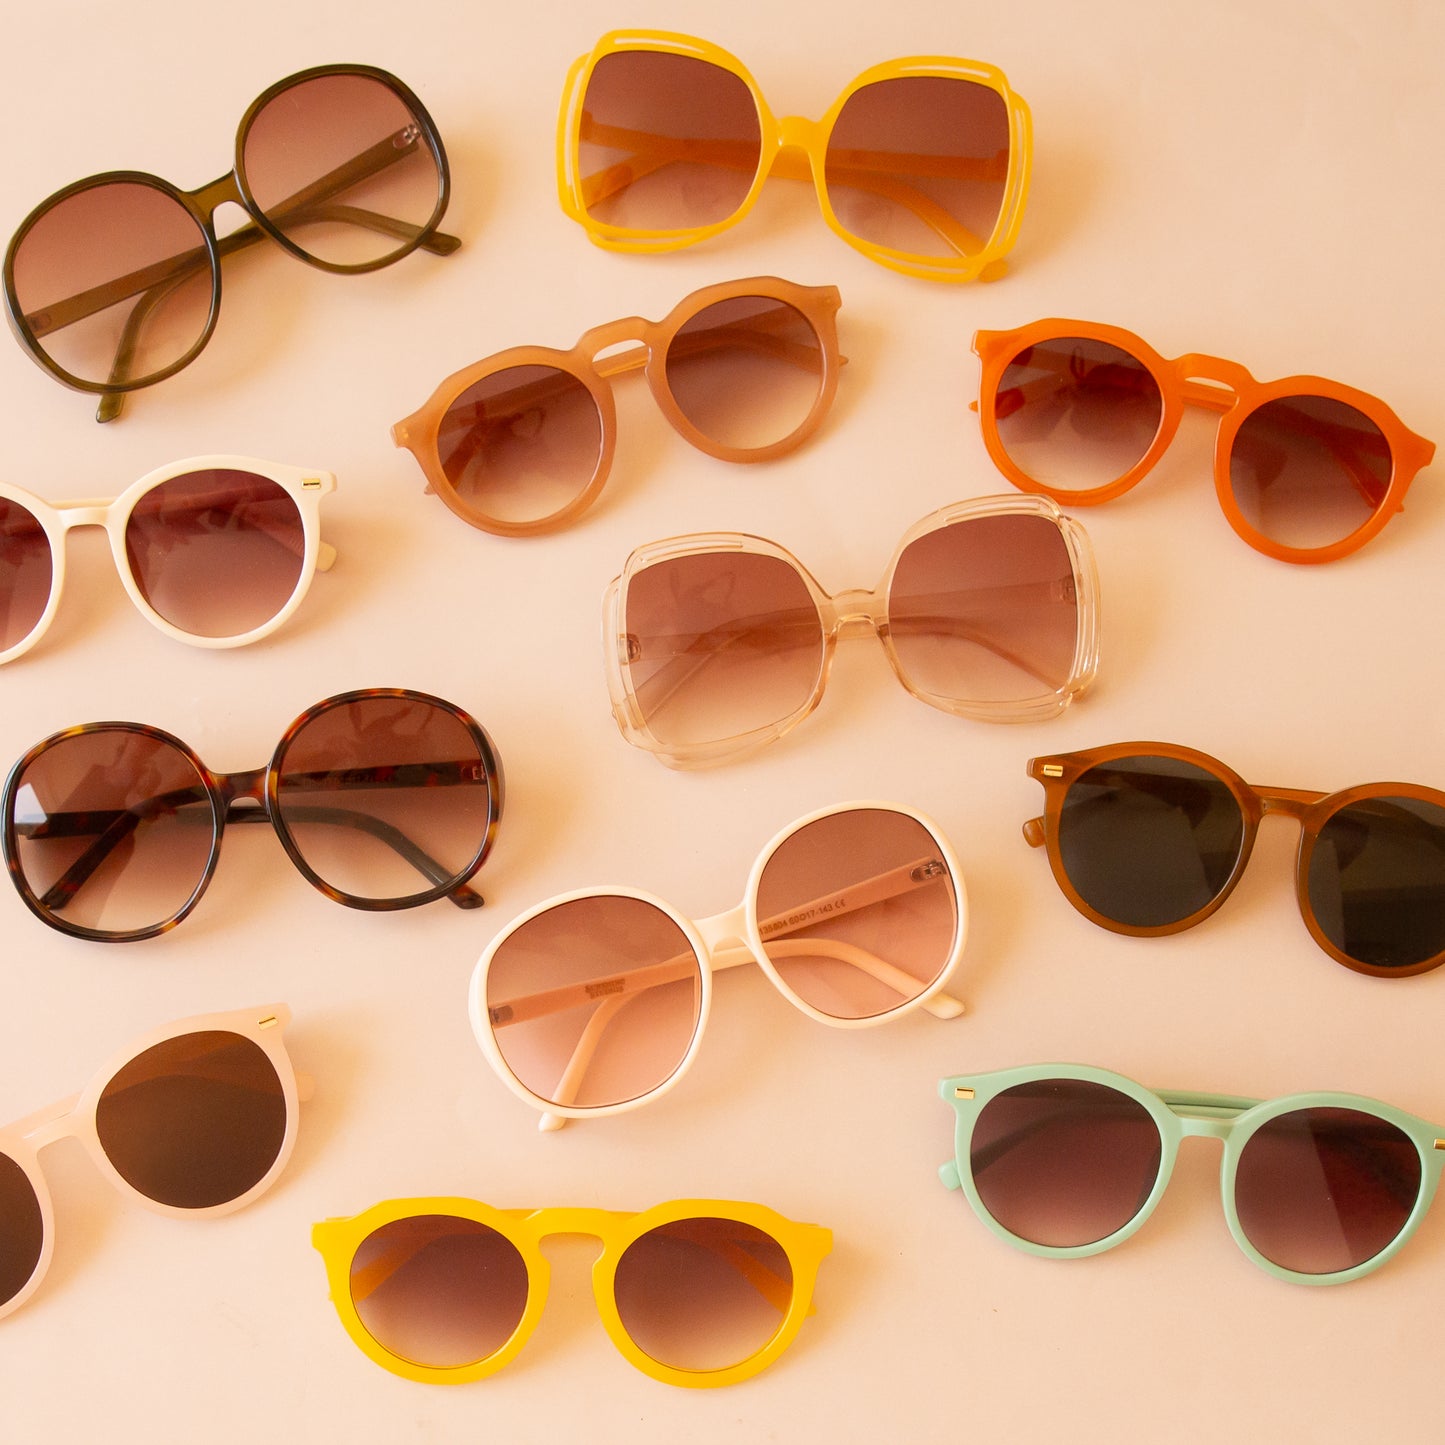 The three circle Bardot sunglasses in different colors. Ivory, Juniper and cognac.